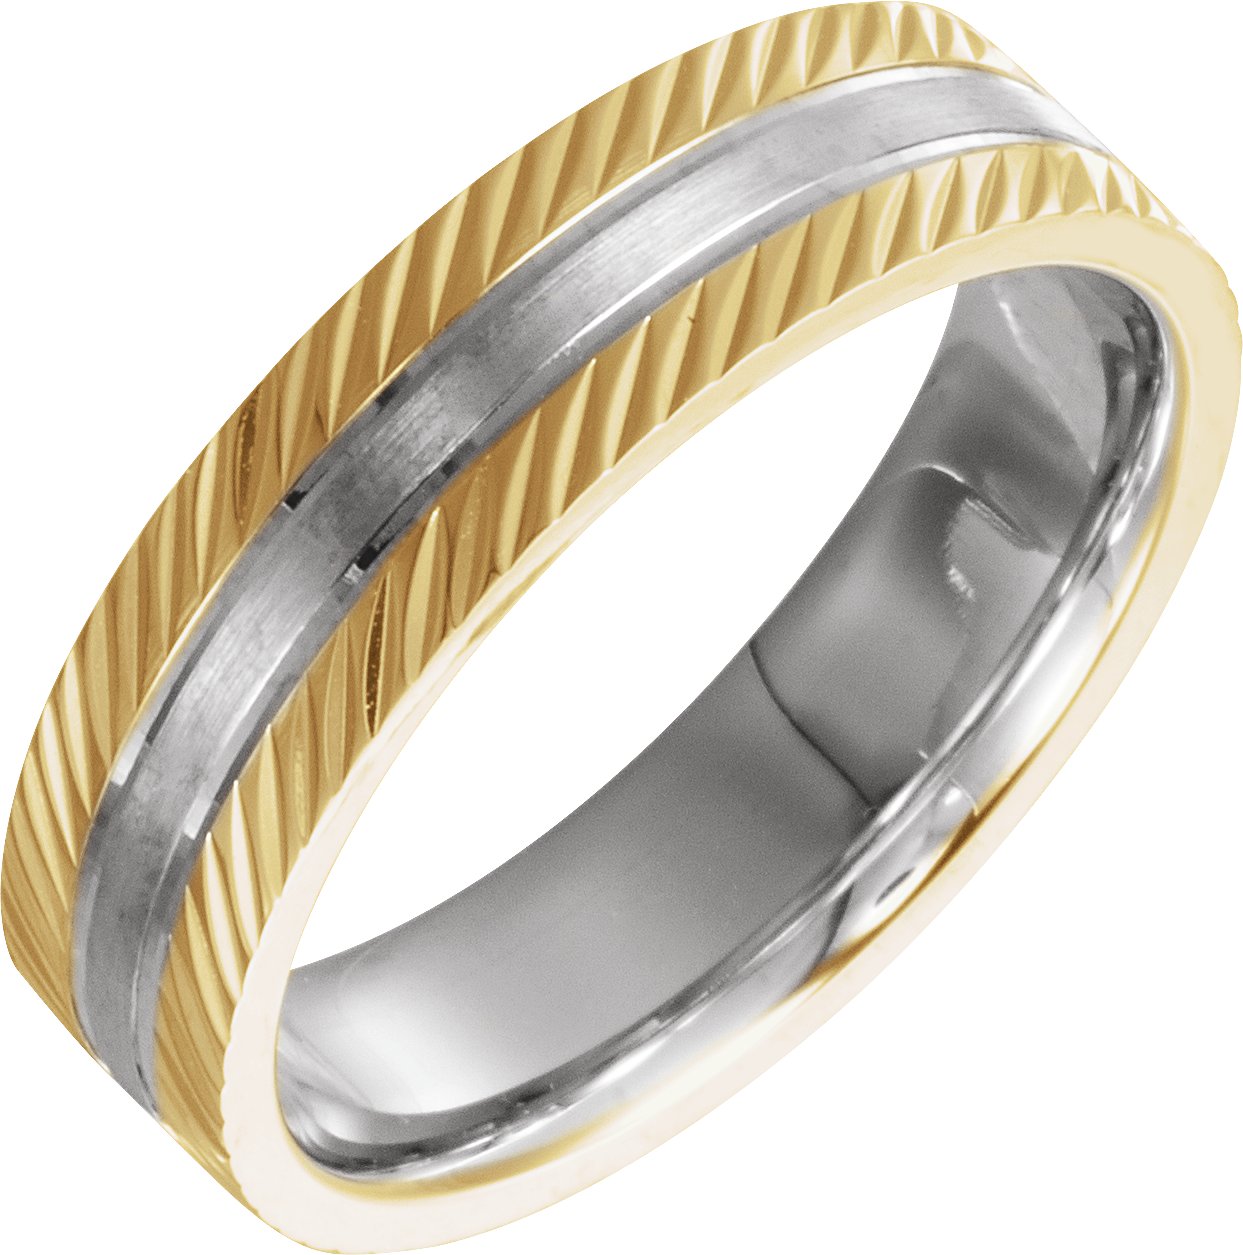 14K Yellow and White 6 mm Design Engraved Band Size 9.5 Ref 14916610